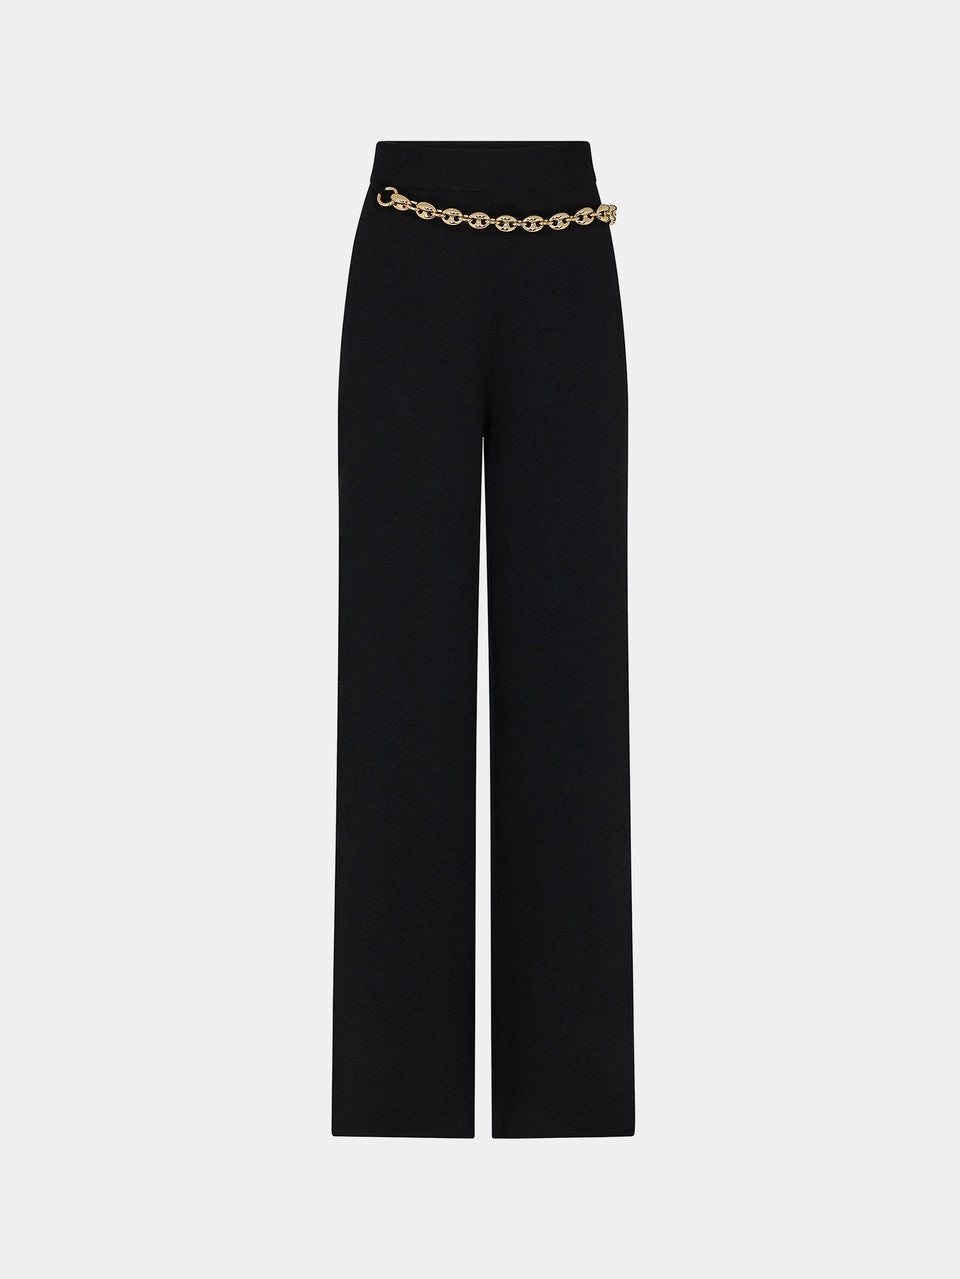 Black trousers with the gold eight chain